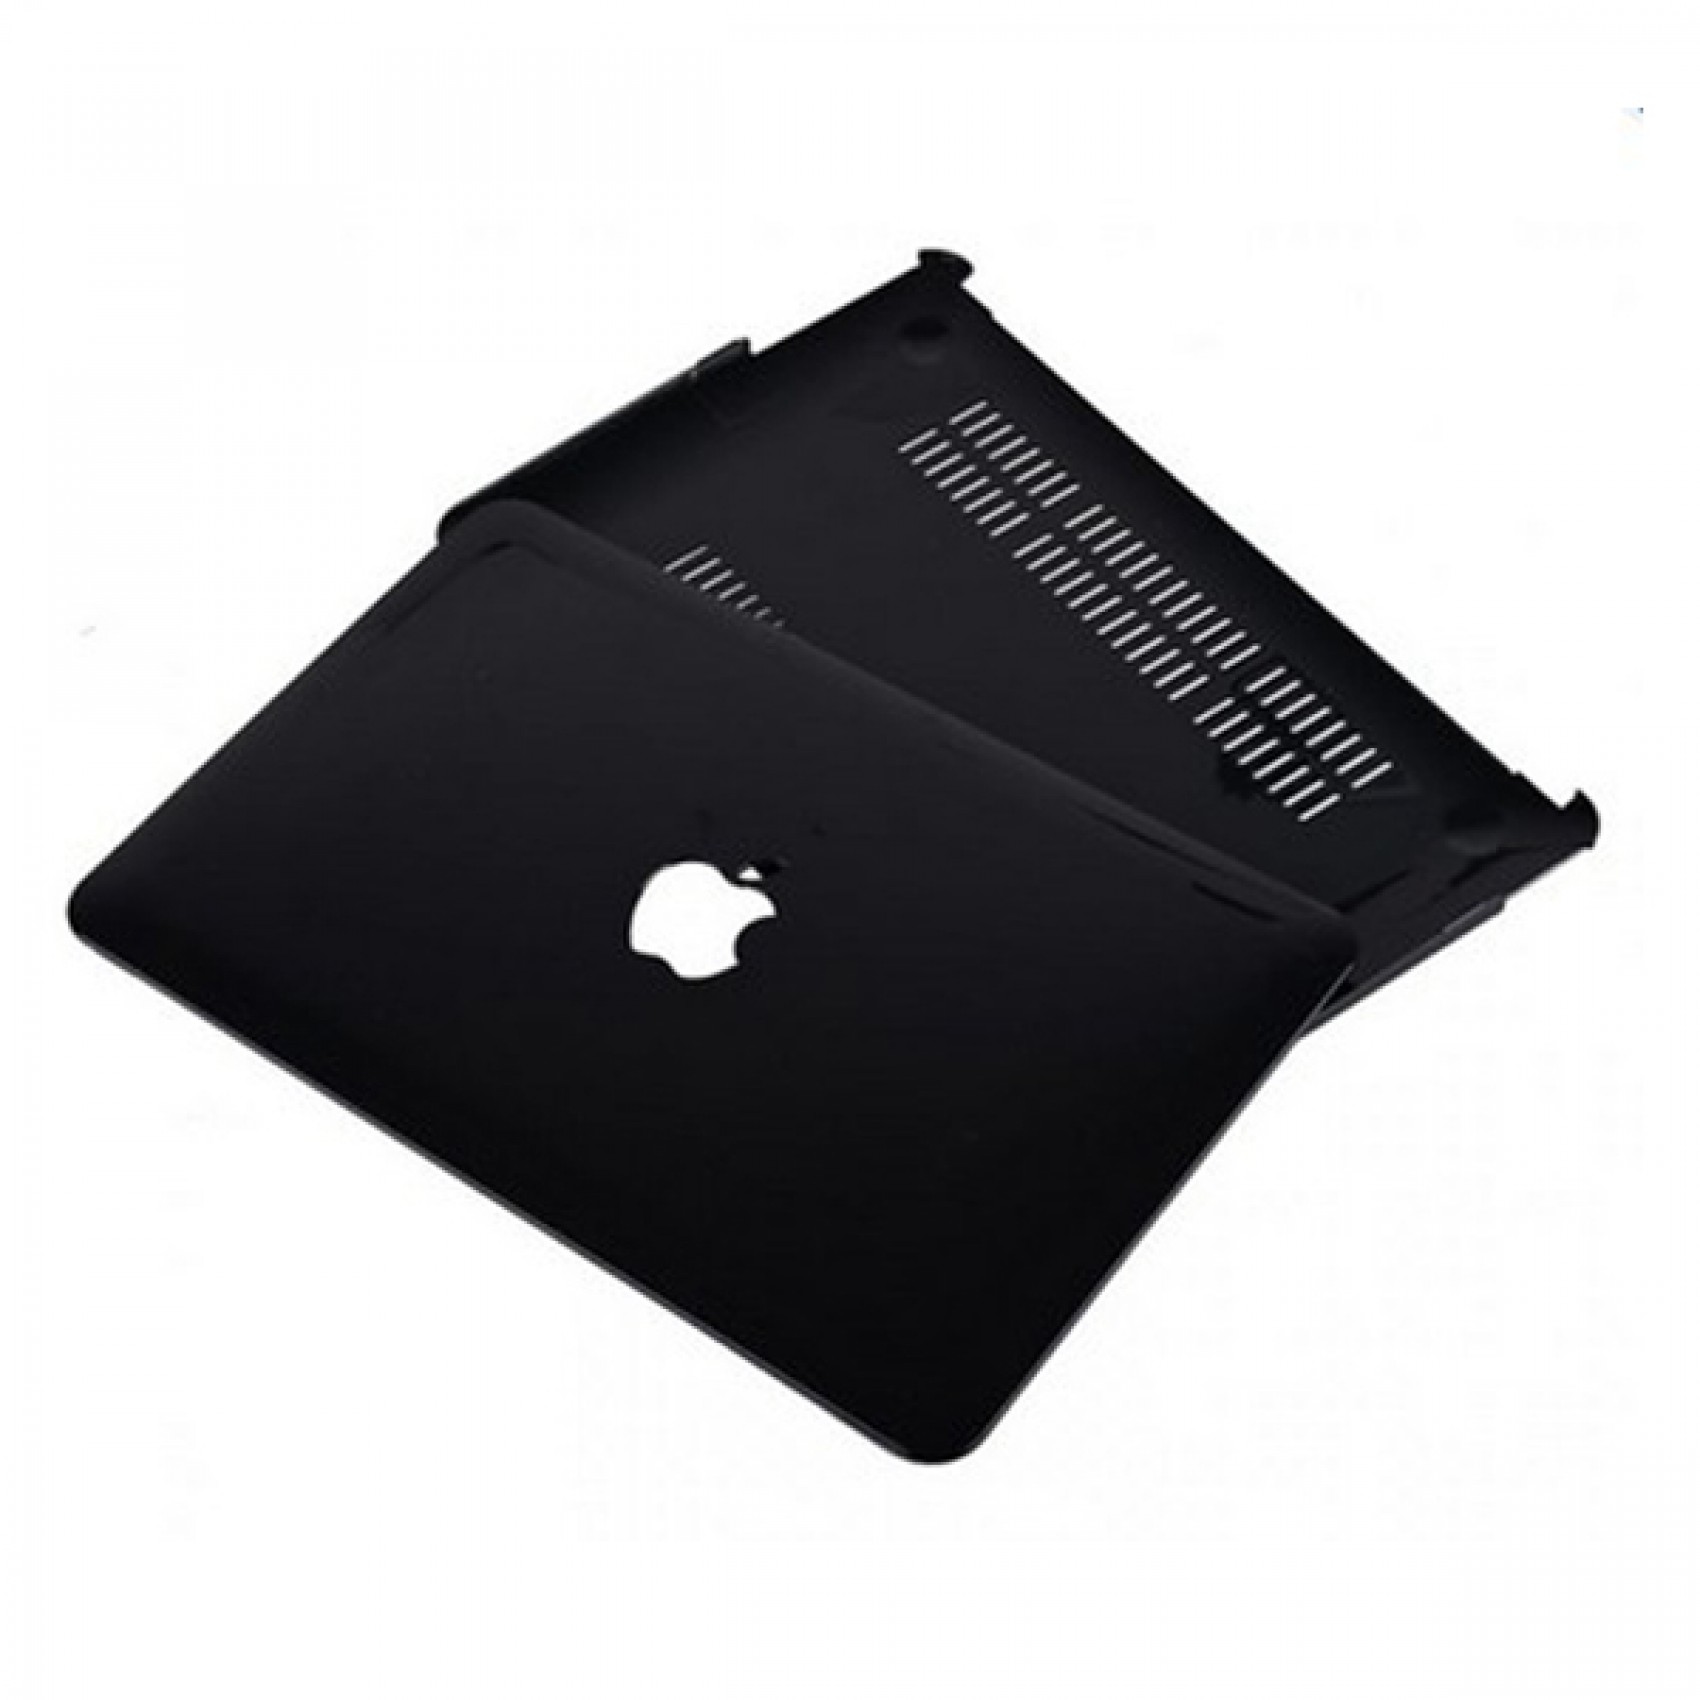 13.3-inch Macbook Air Protective Full Body Case with Apple Logo ...